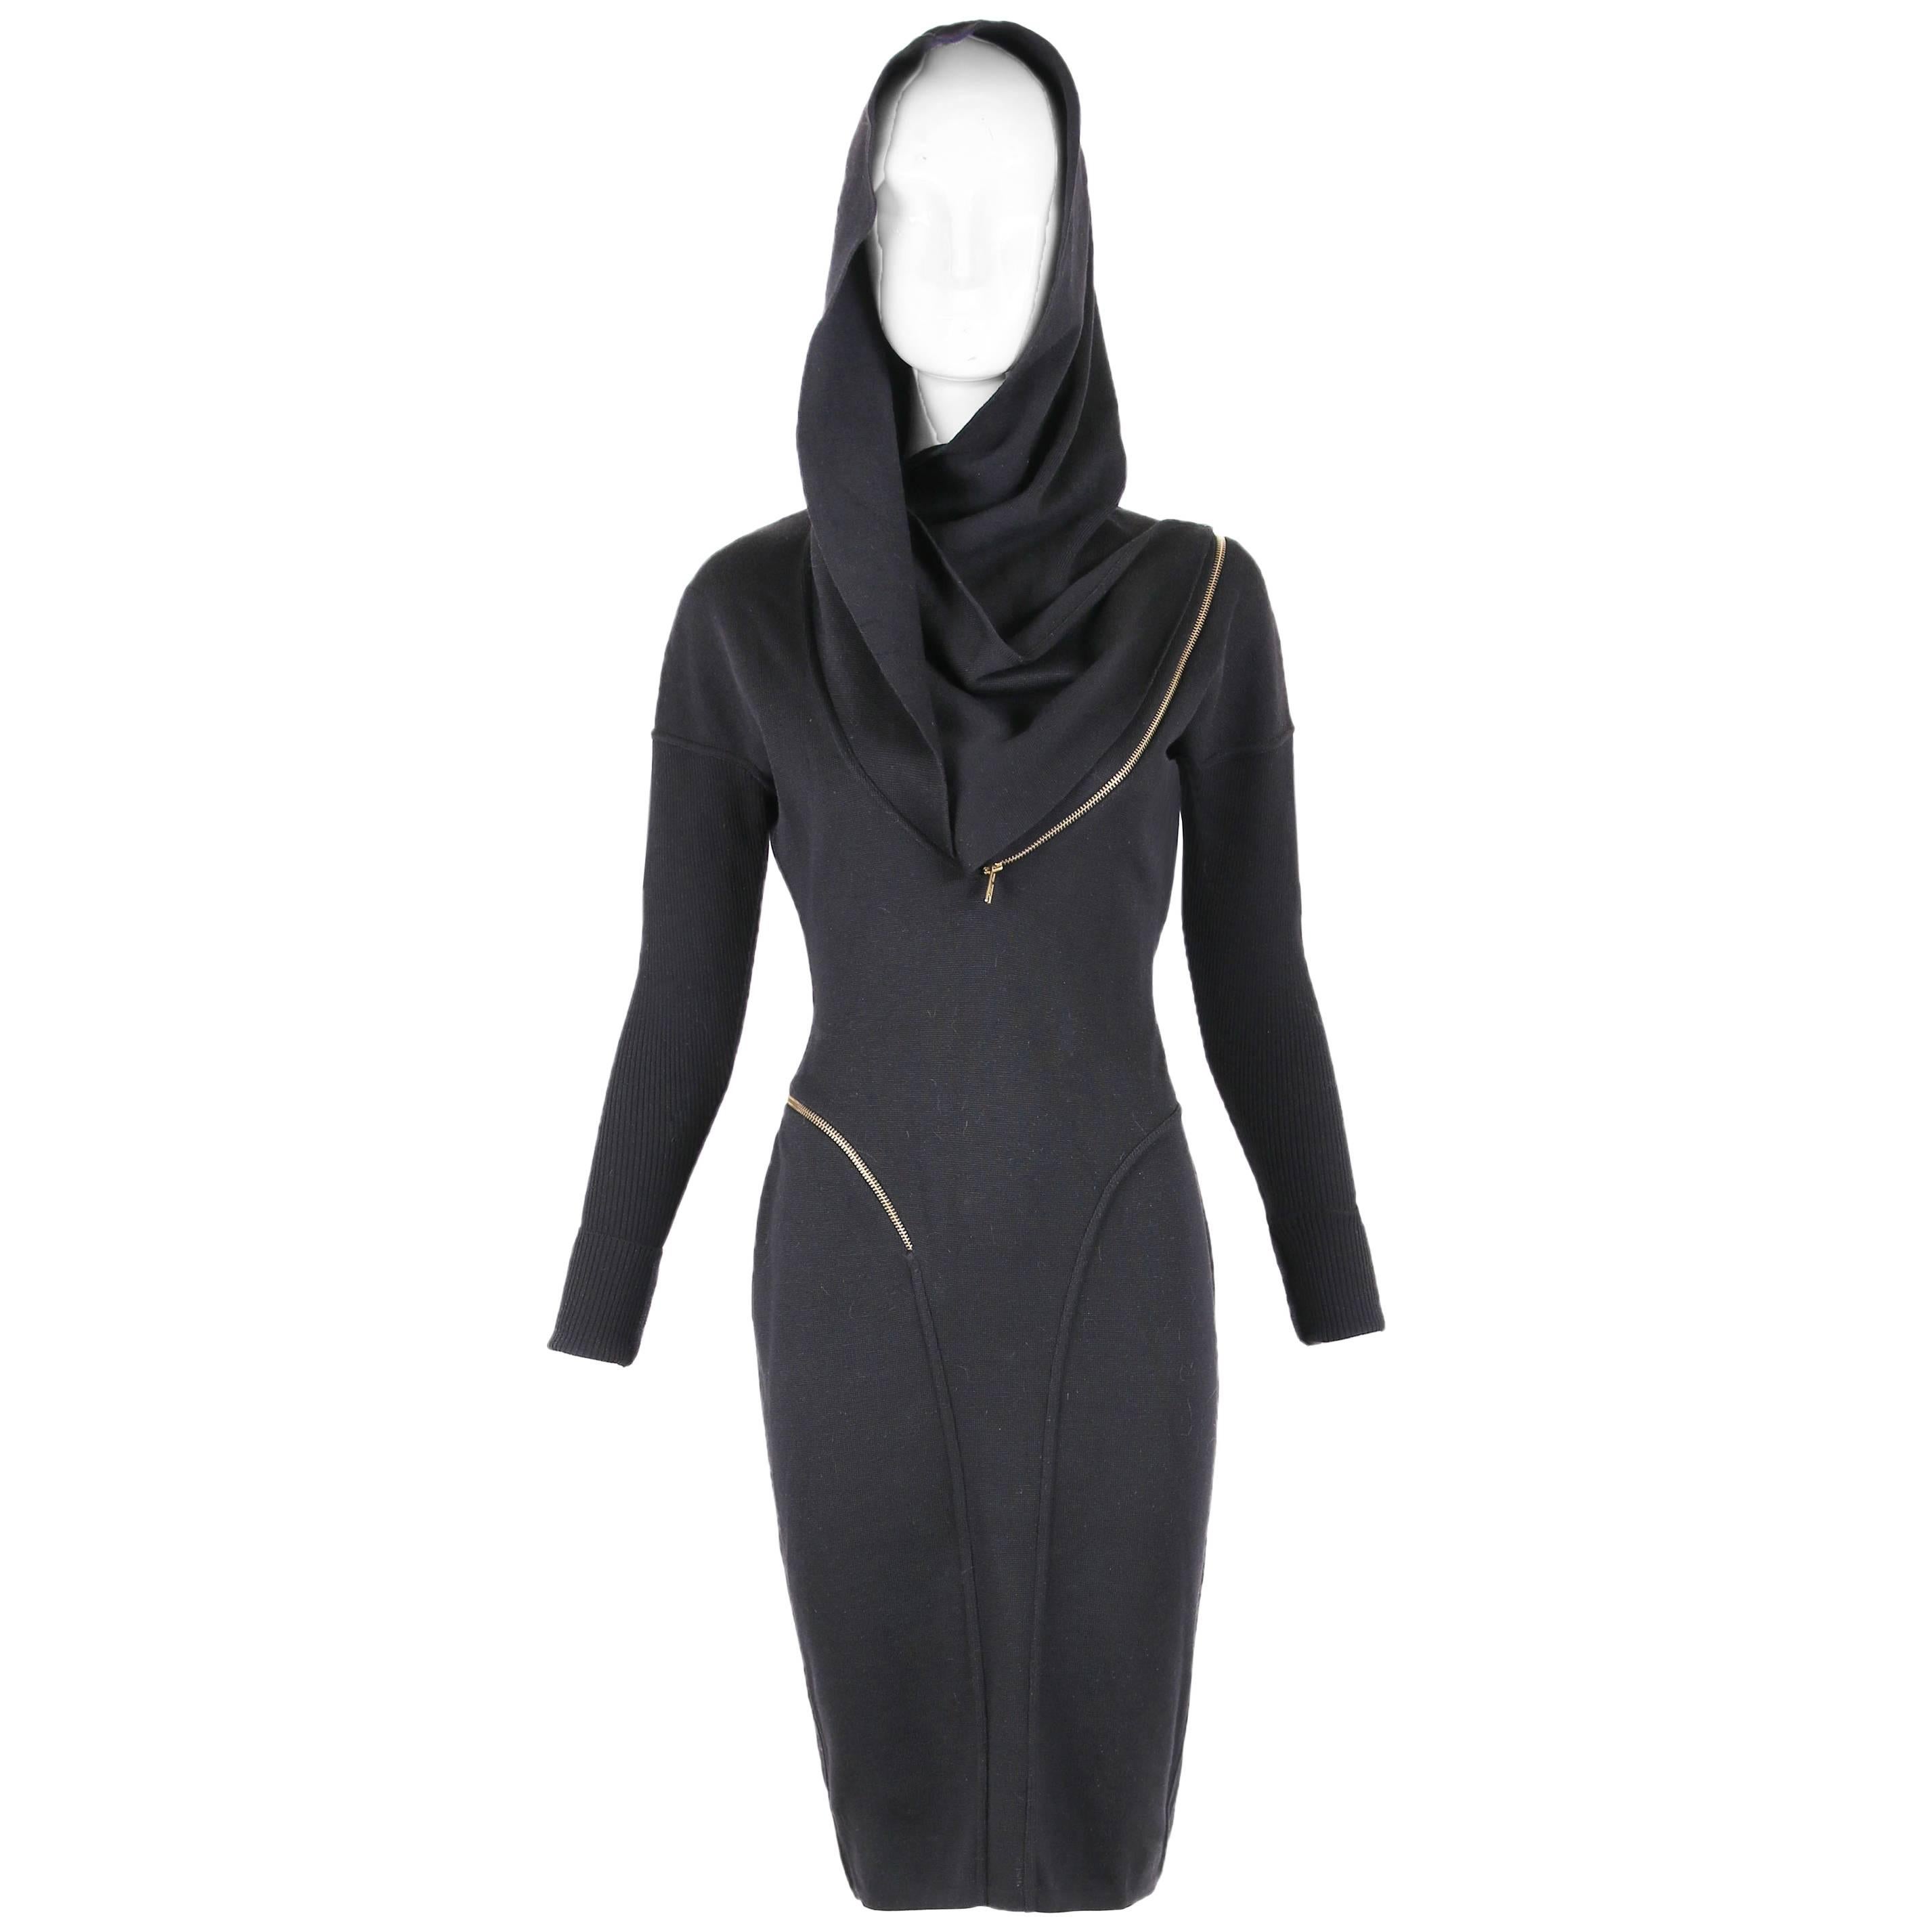 Alaia Museum Quality Black Hooded And Zippered Bodycon Dress, 1986